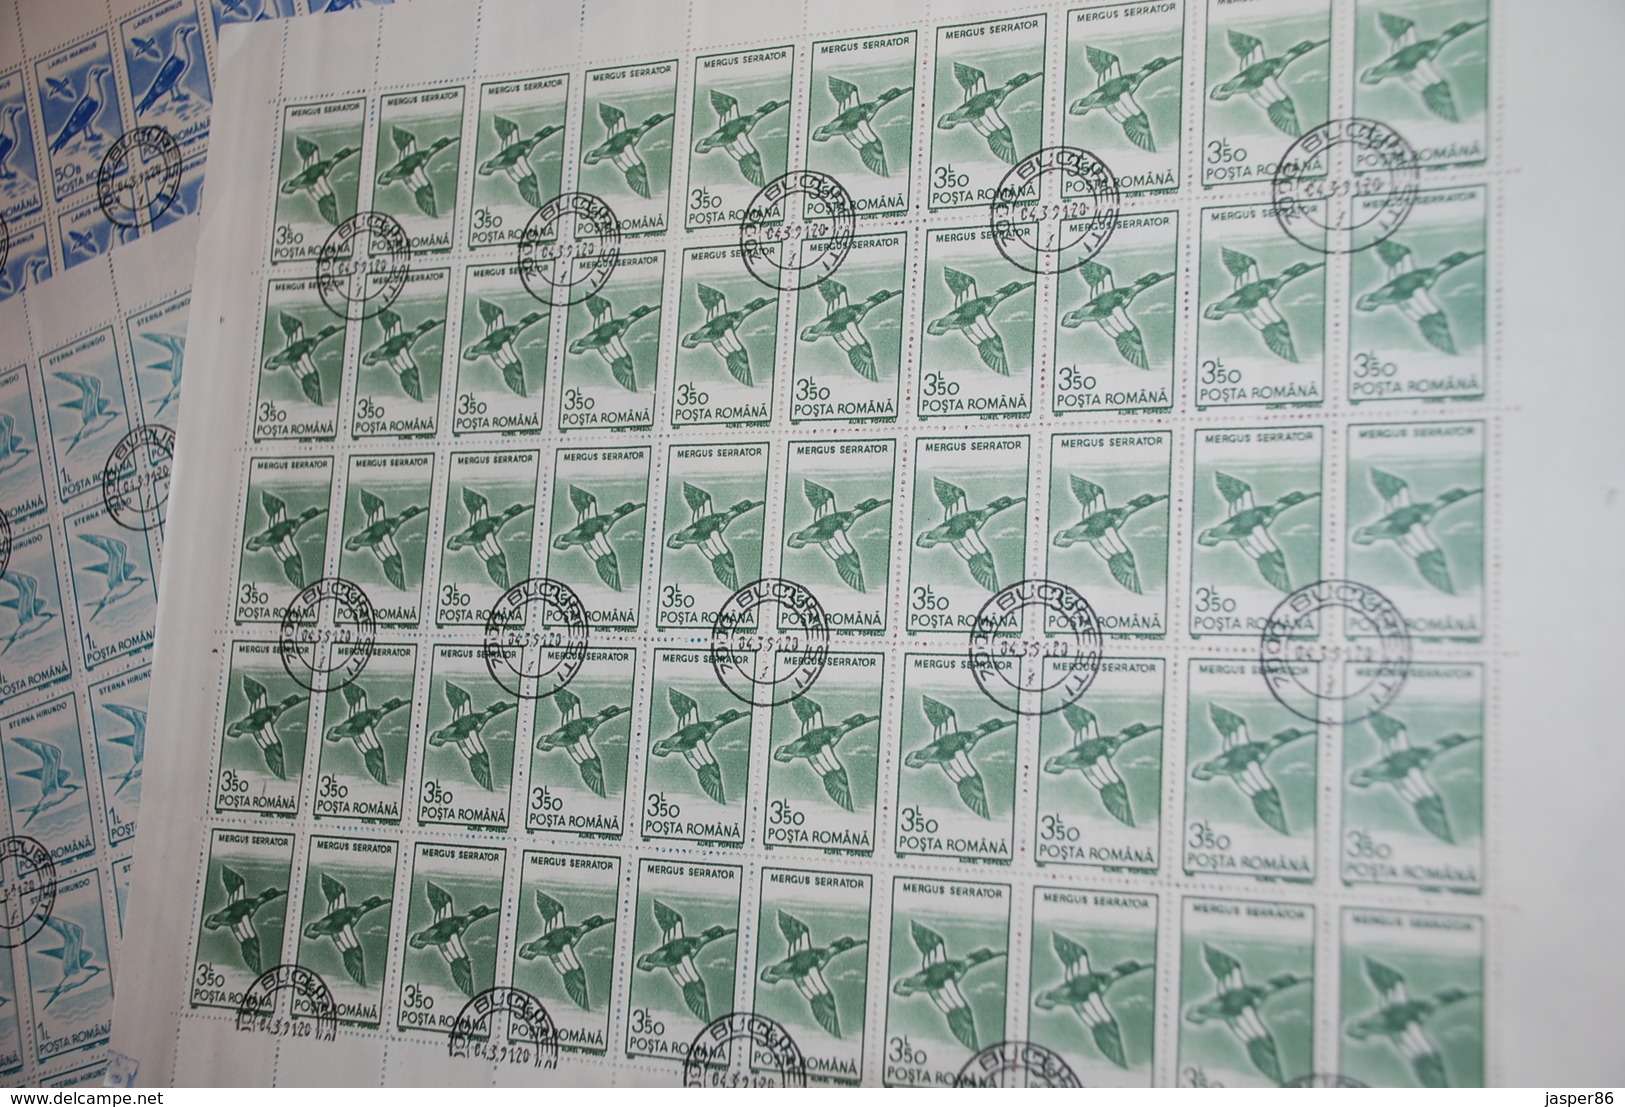 ROMANIA 500 Waterfowl Birds Sc 3639-3648, 50 X Complete Sets WHOLESALE CV$100 - Full Sheets & Multiples